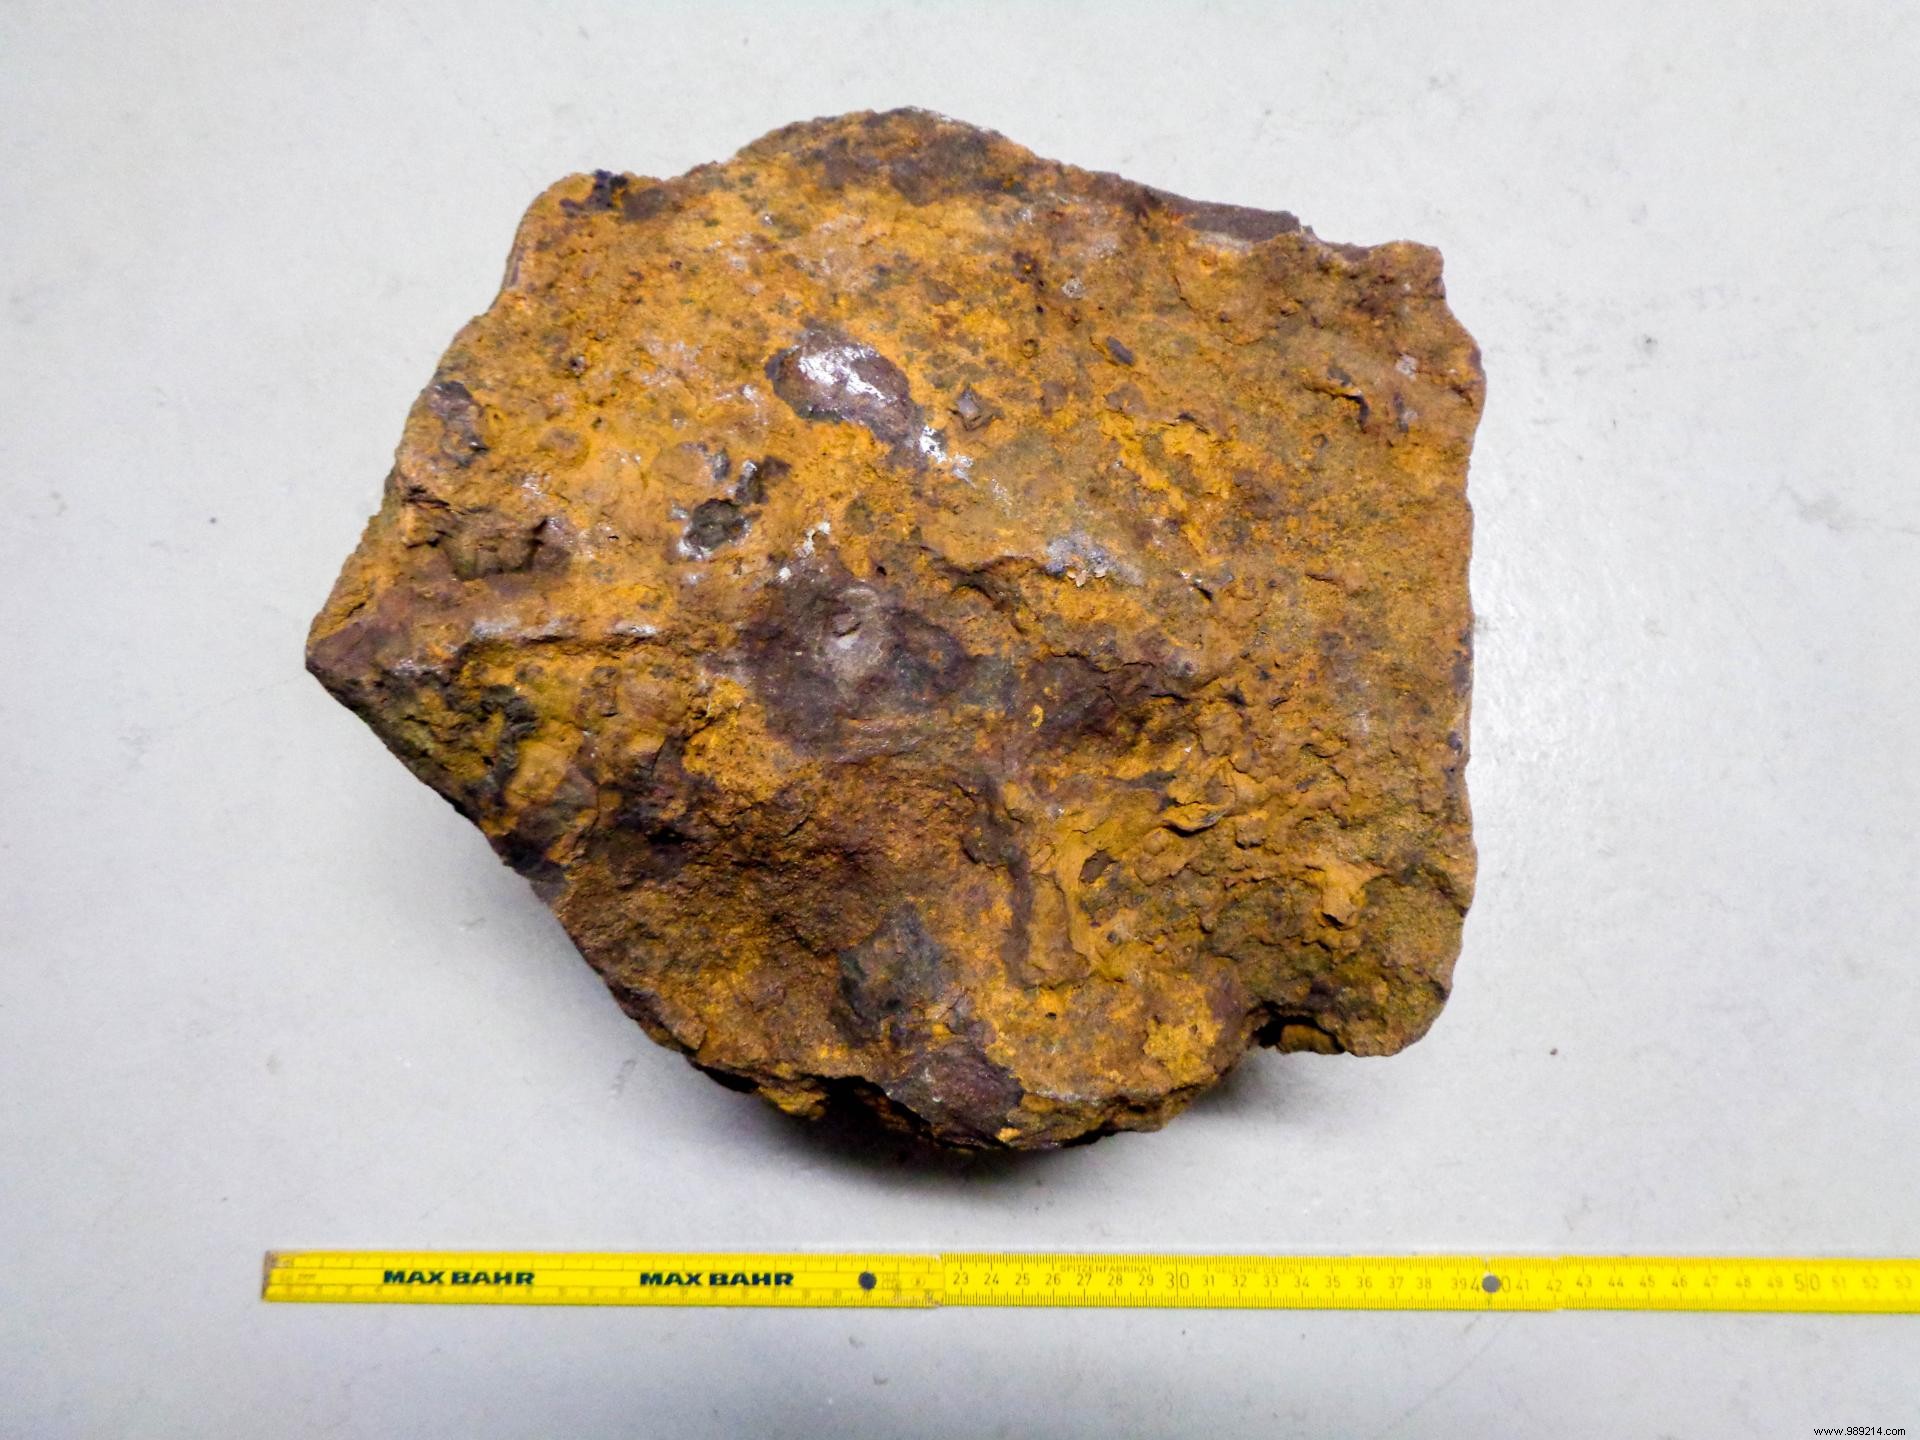 This German discovers a 30 kg meteorite in his garden 